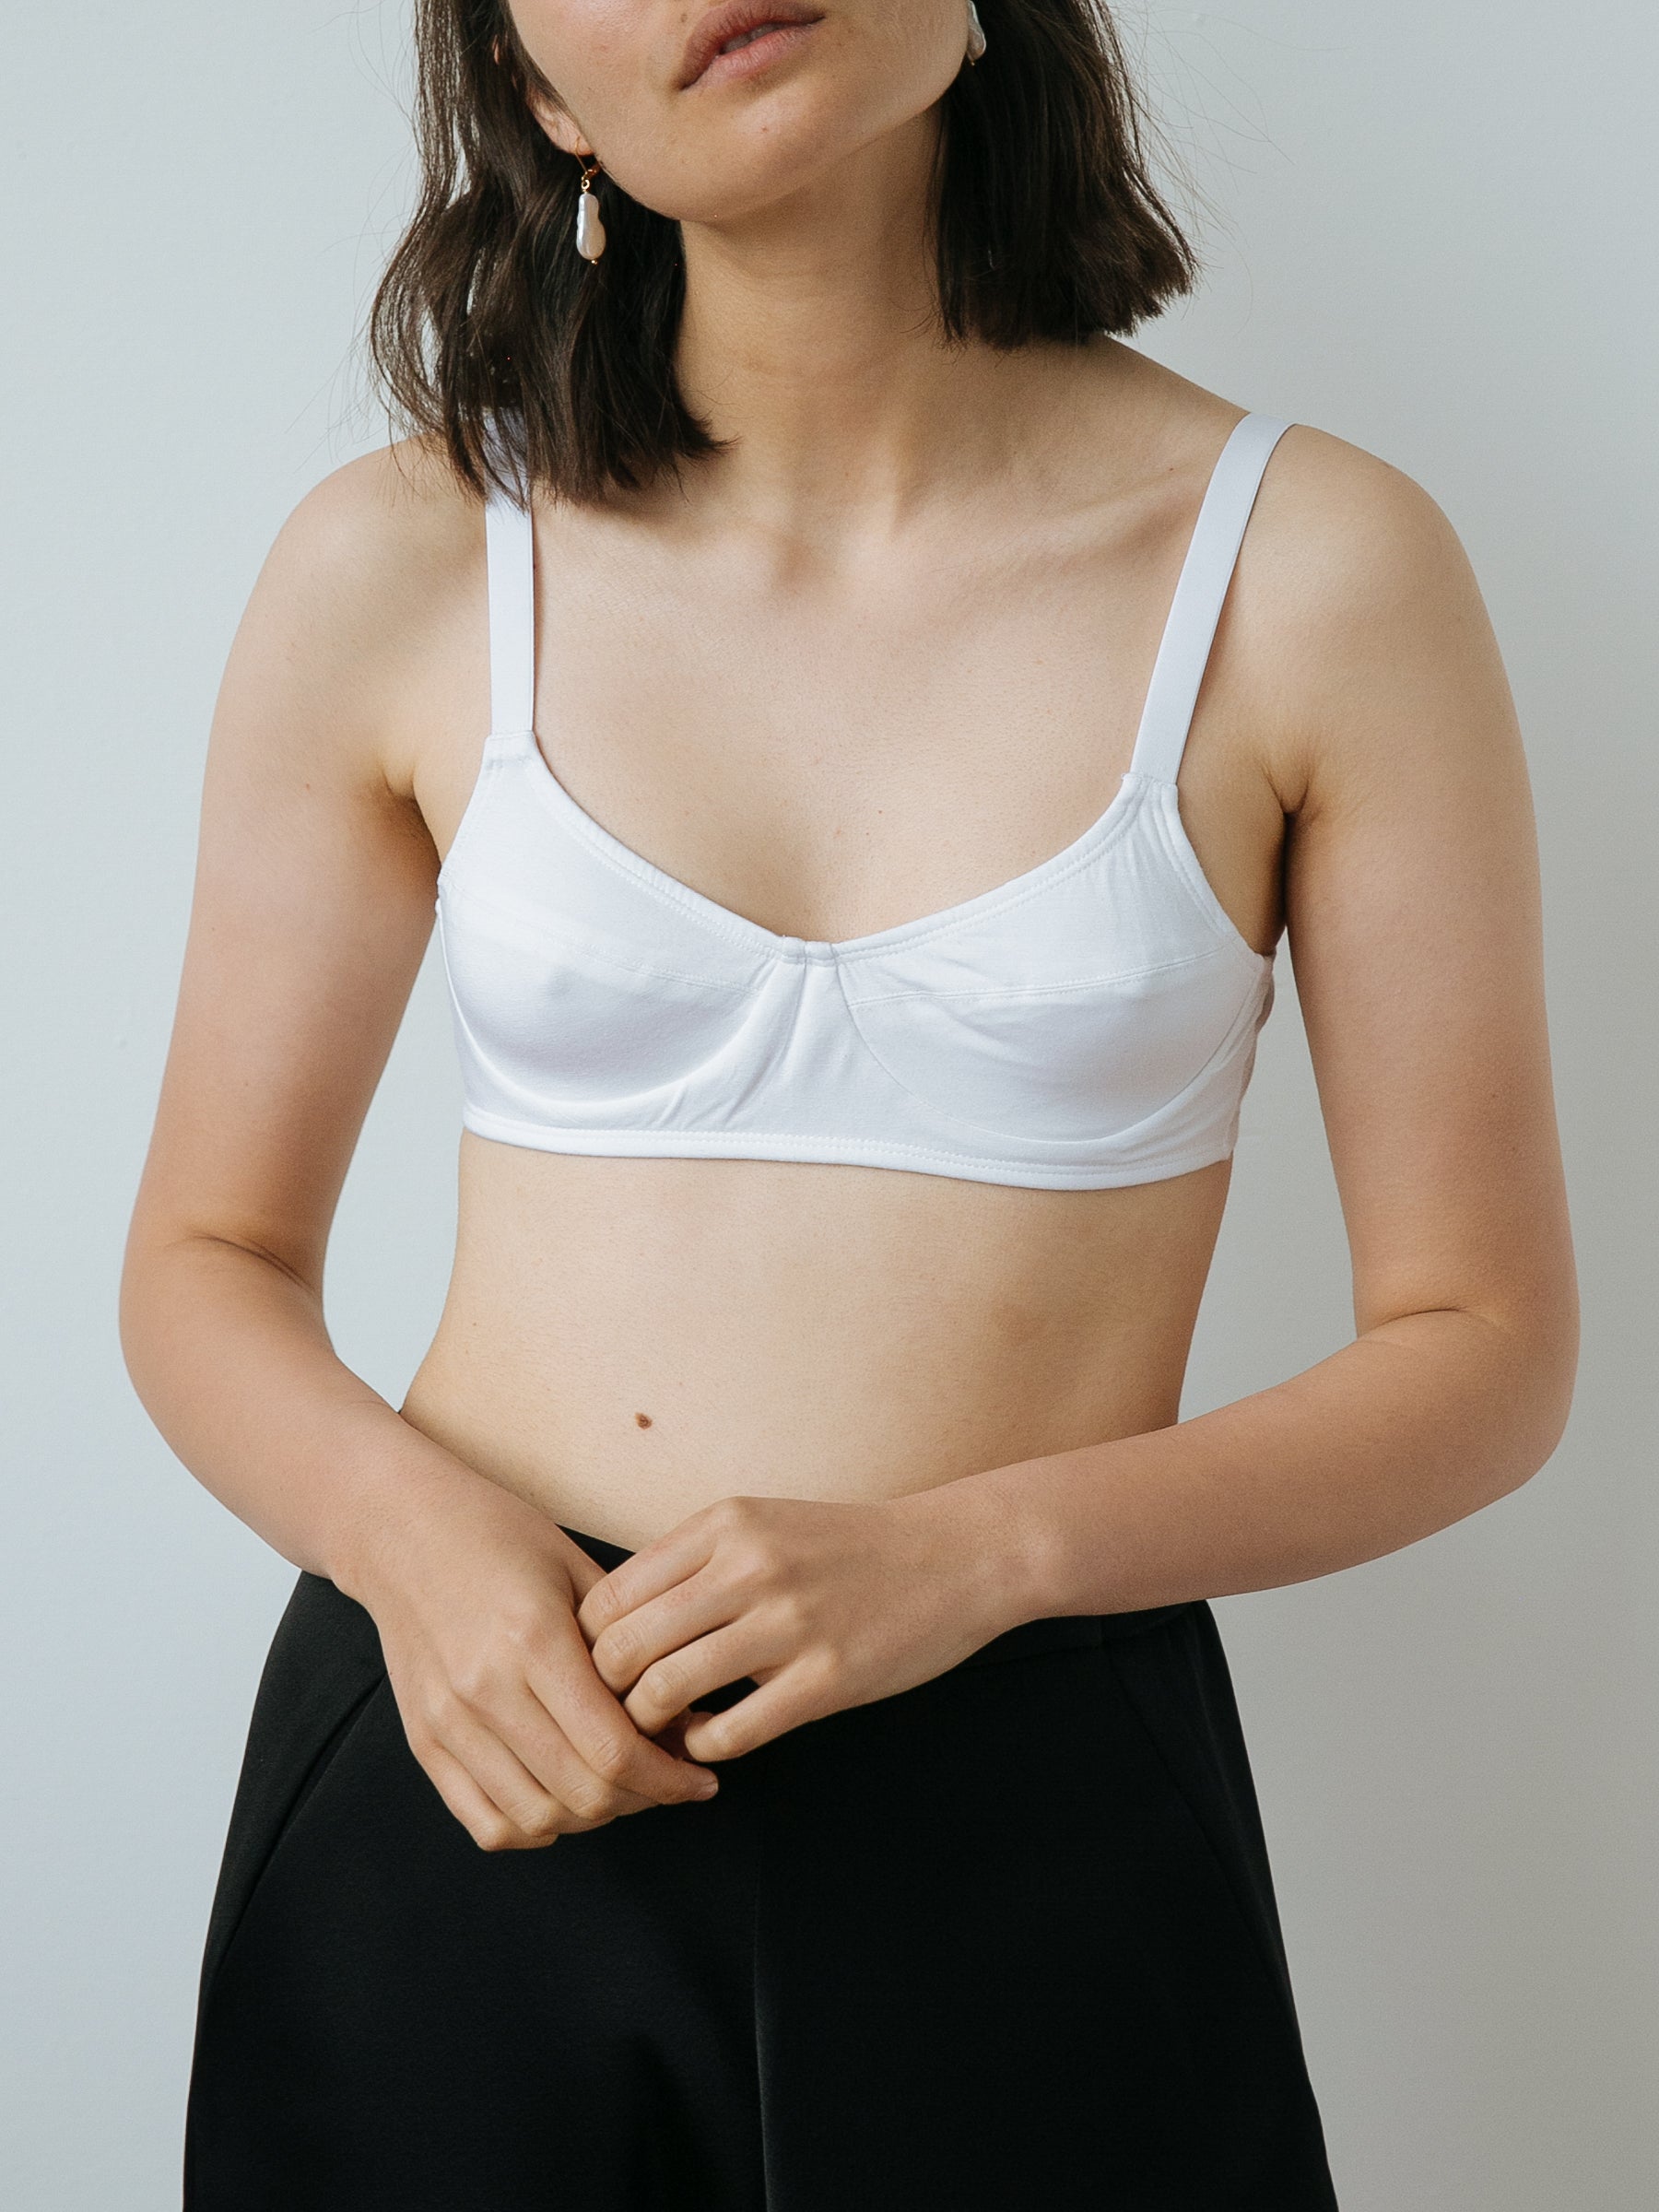 all undone lingerie on X: A flash of Willa bra, courtesy of a